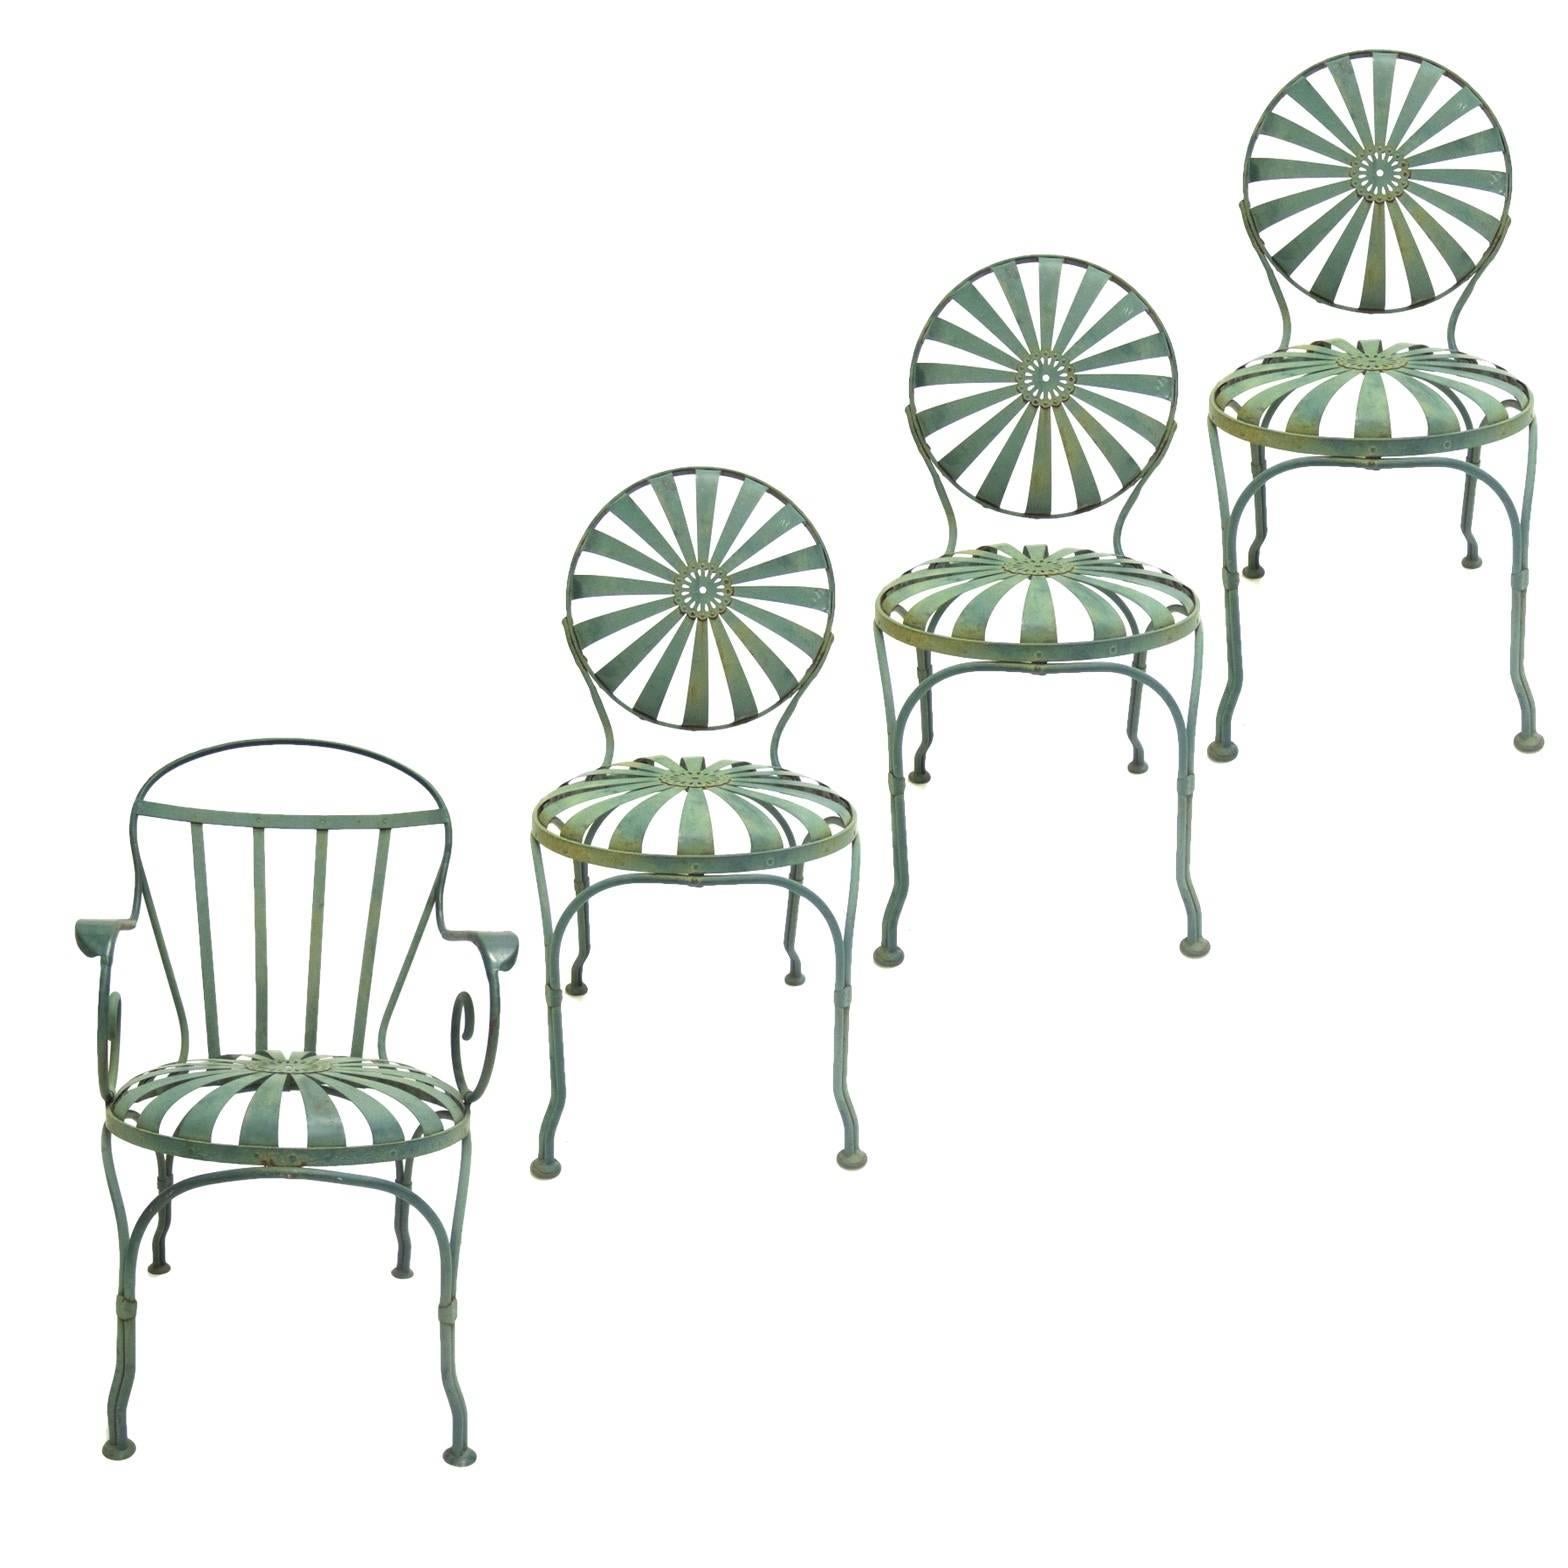 All original beautifully patinated French 1930s Francois Carre iron patio chairs.